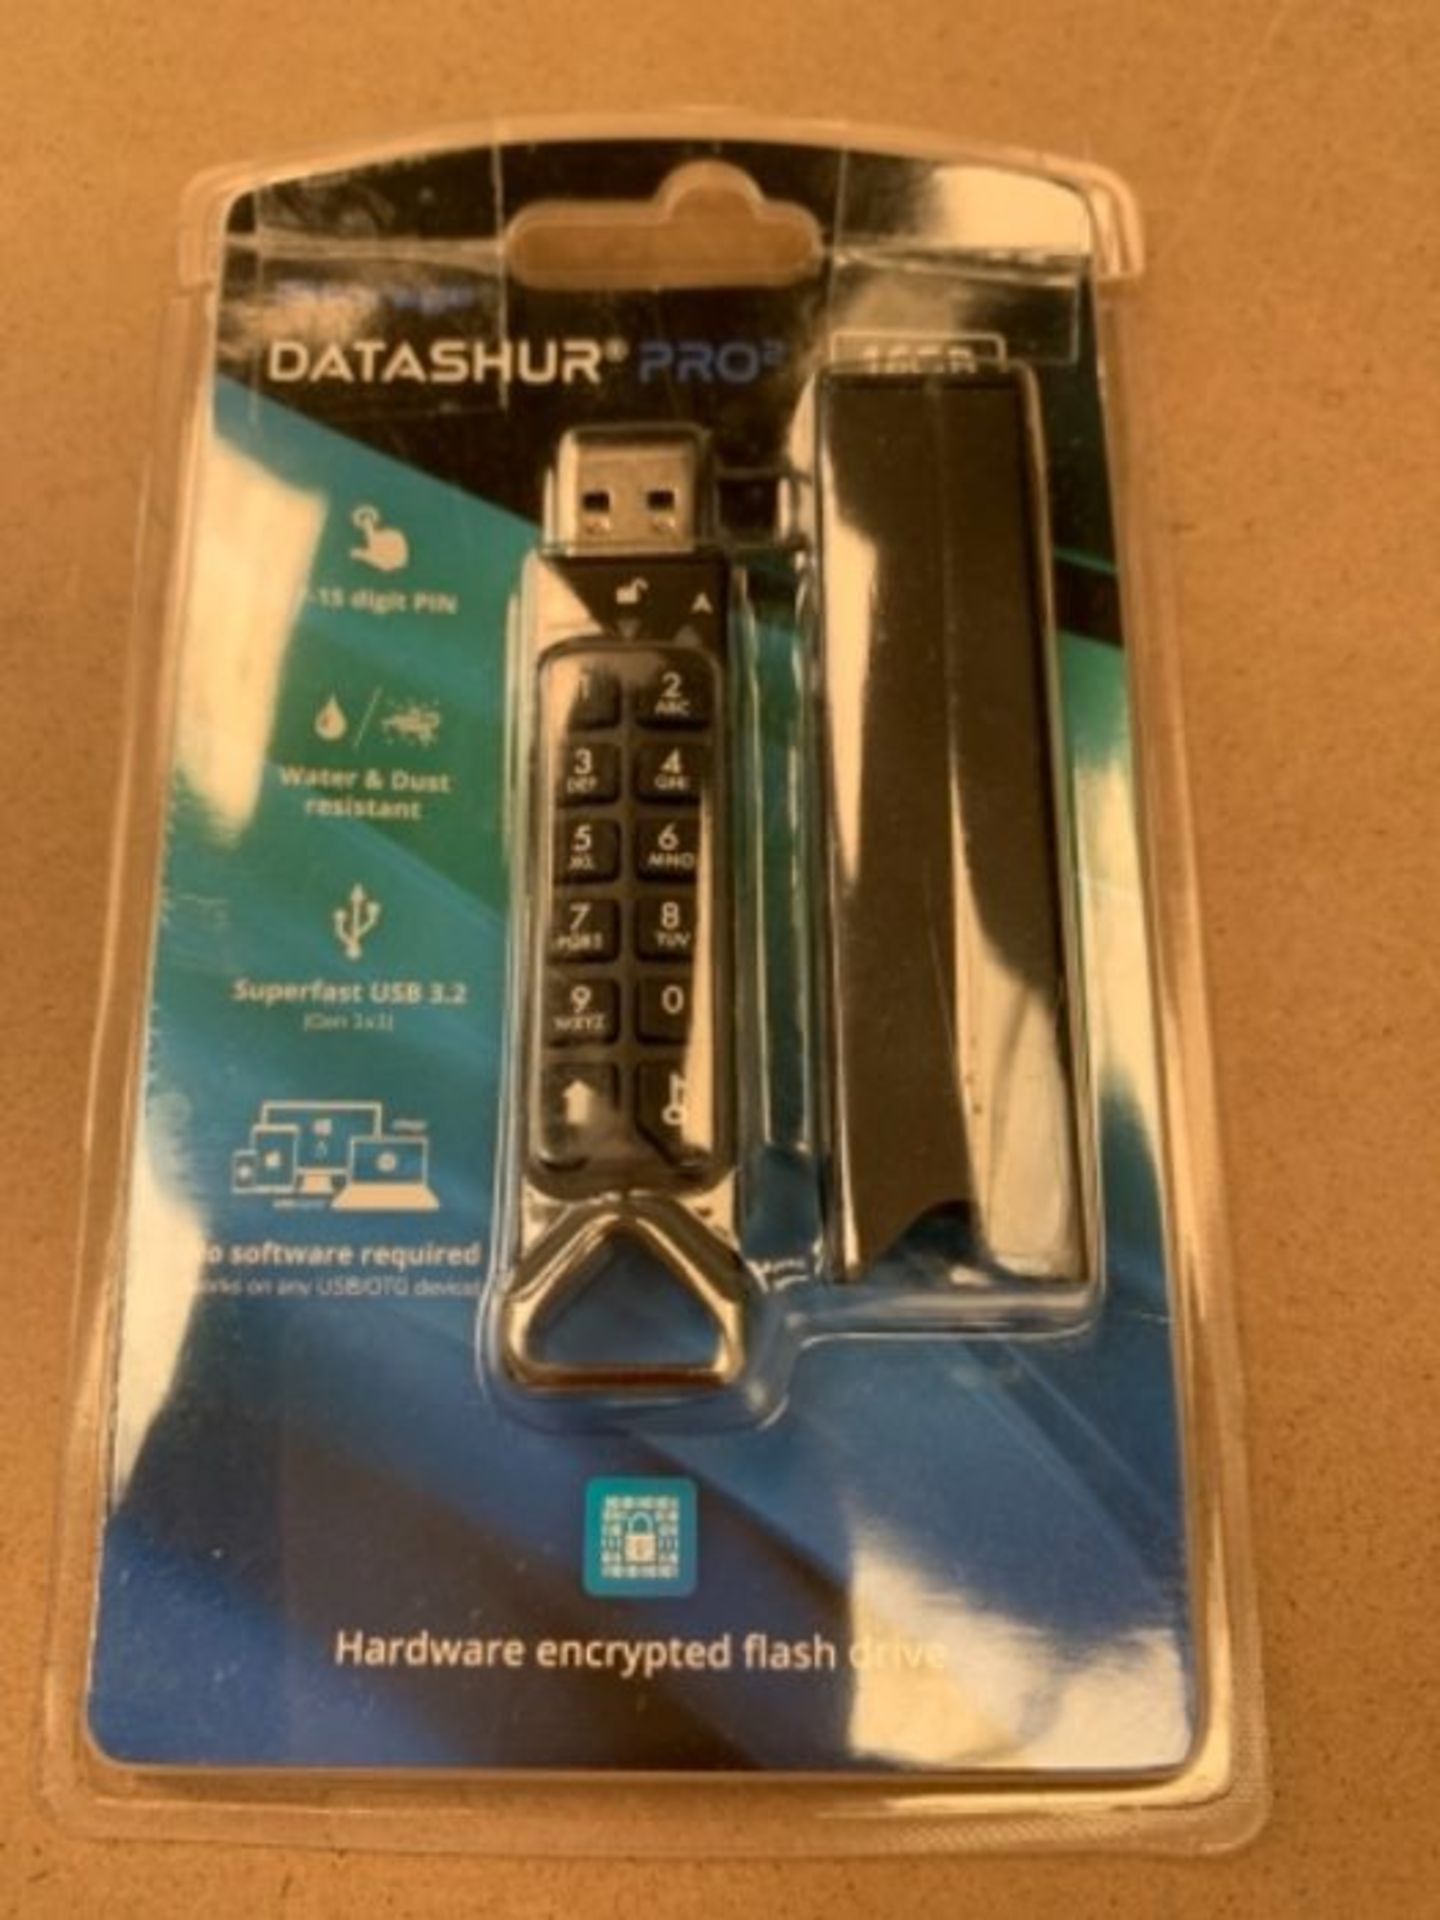 RRP £102.00 iStorage datAshur PRO² 16 GB Secure Flash Drive - FIPS 140-2 Level 3 Certified - Pass - Image 2 of 2